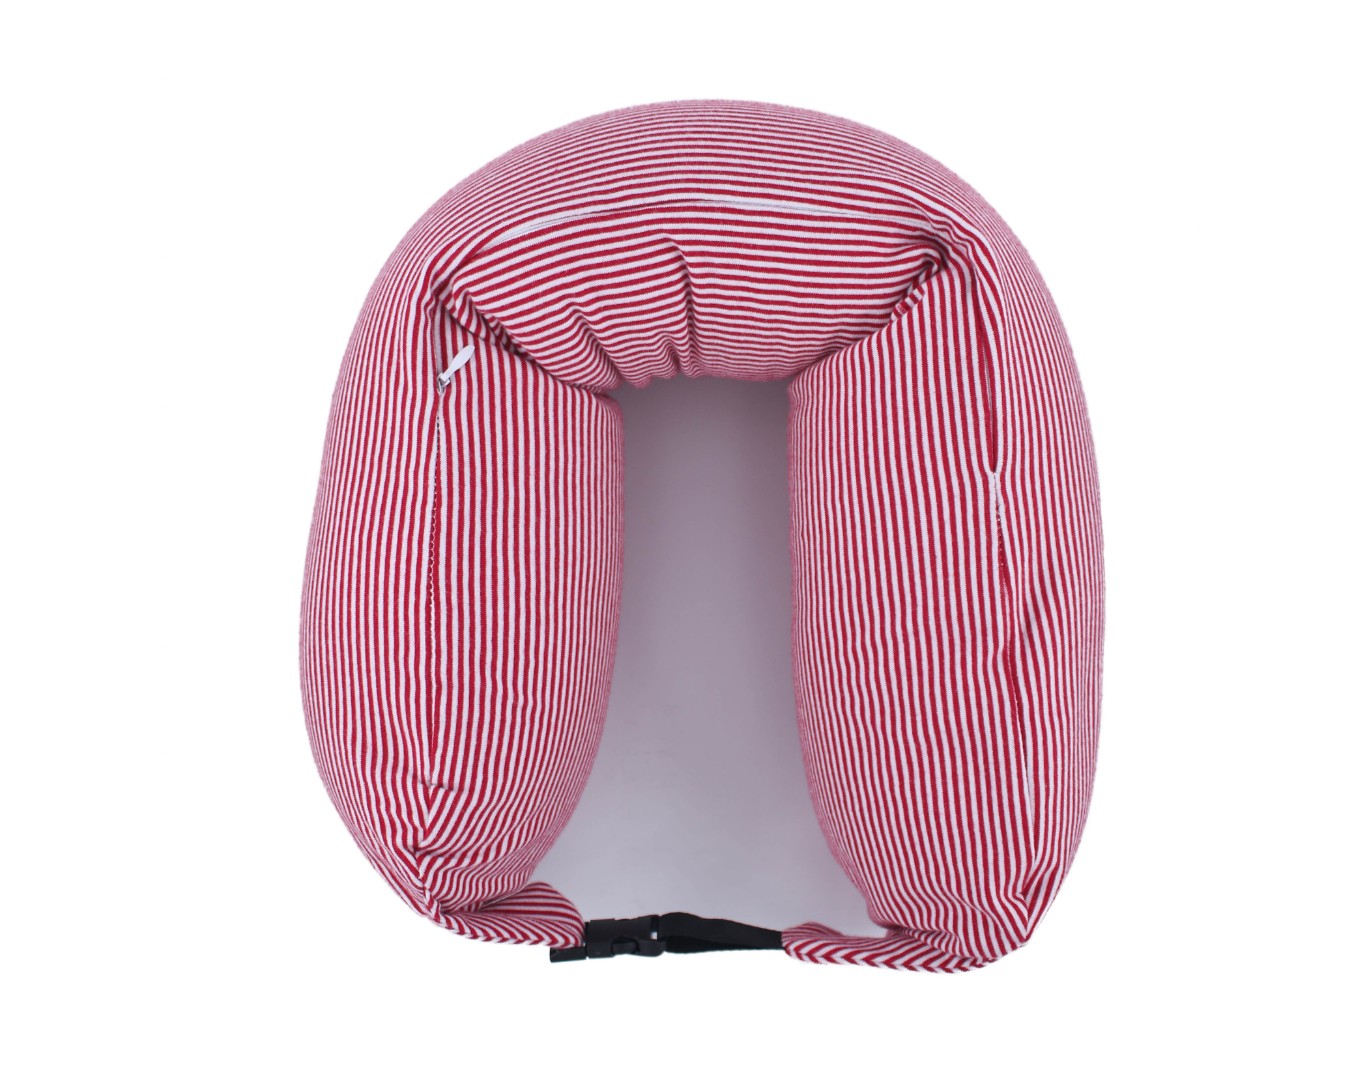 Yujiso neck pillows u-shaped with adjustable neck size and washable cover for plane, train, car, bus and office